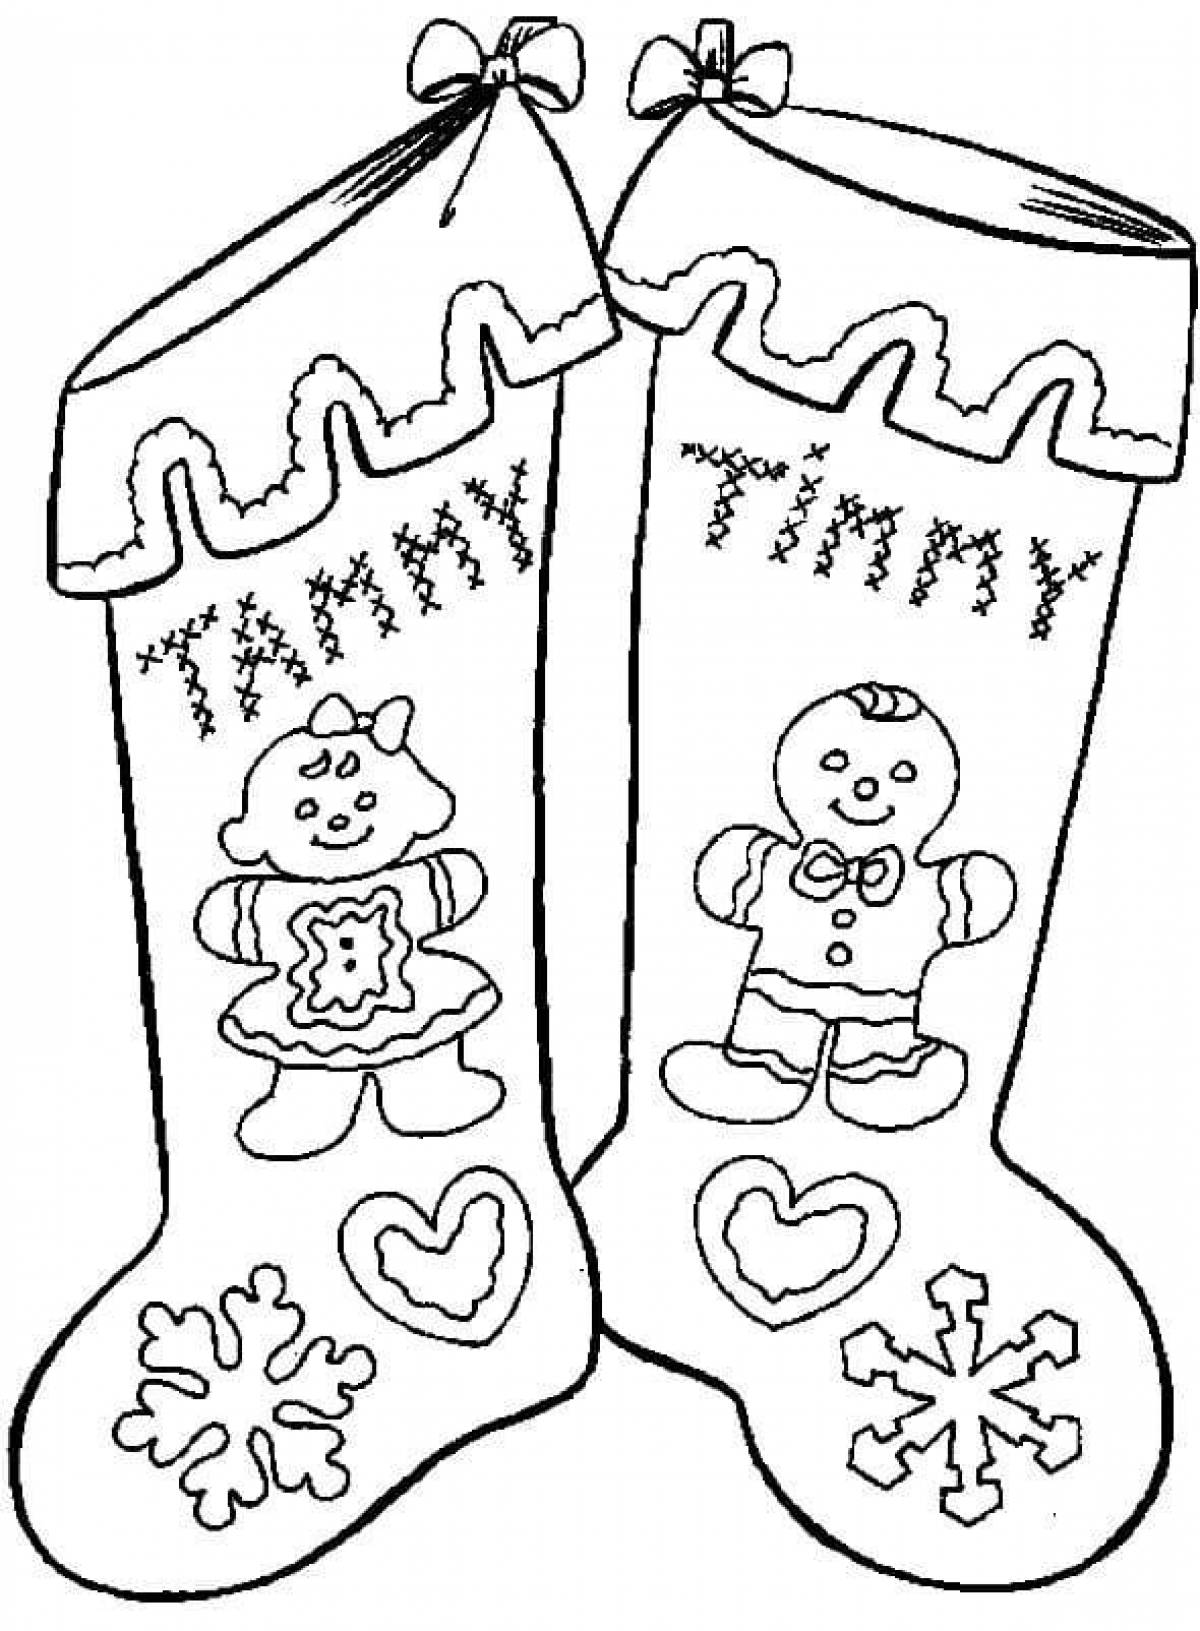 Merry Christmas sock coloring page